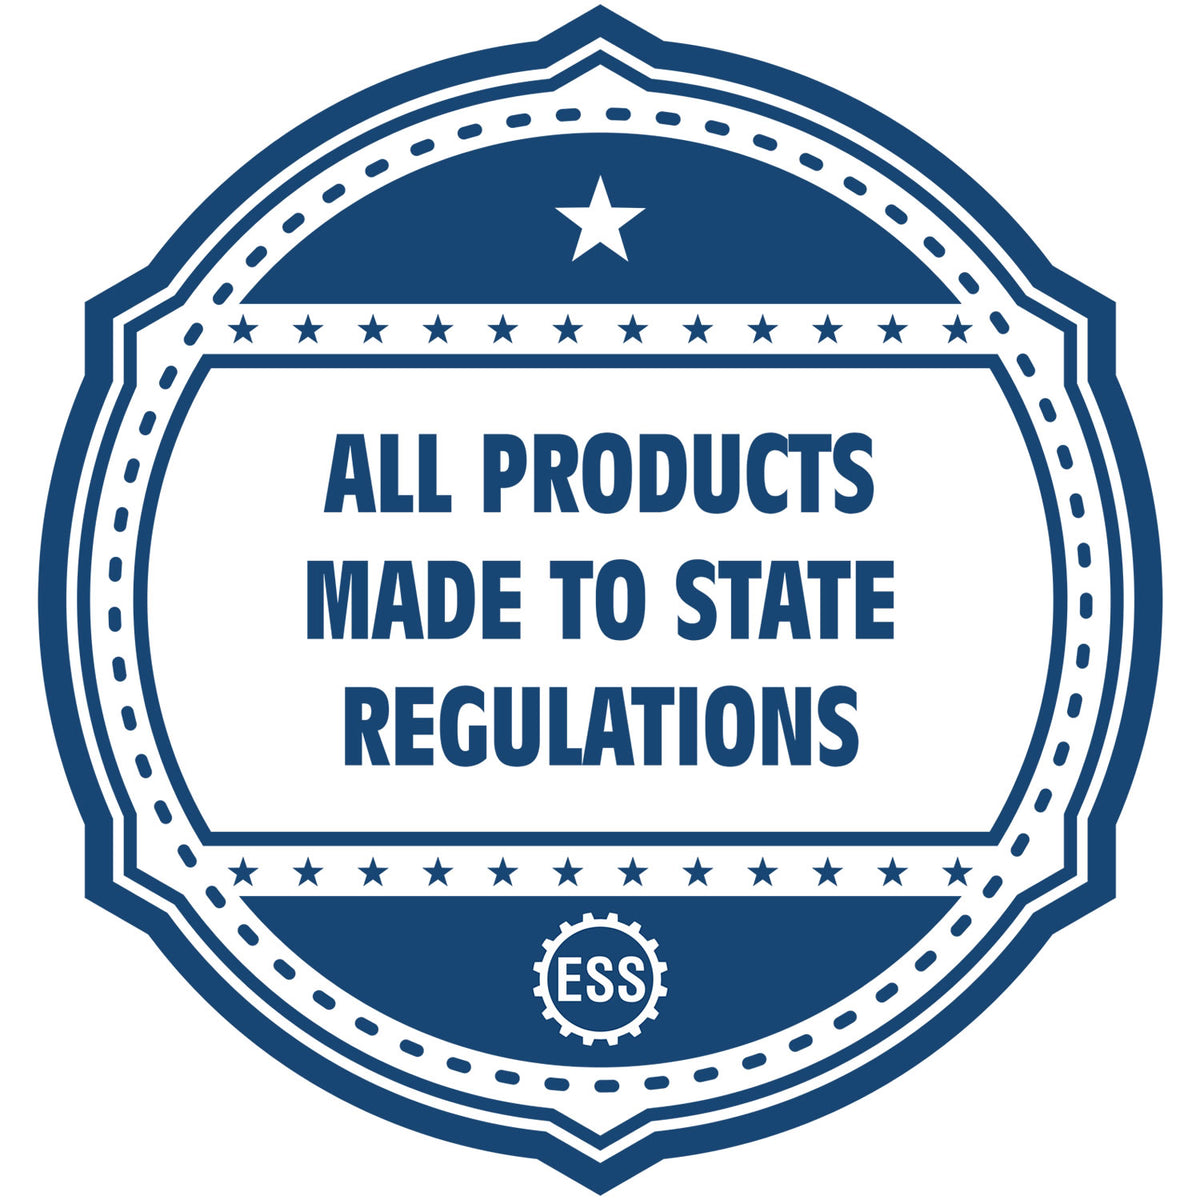 A blue icon or badge for the Hybrid New Mexico Landscape Architect Seal showing that this product is made in compliance with state regulations.